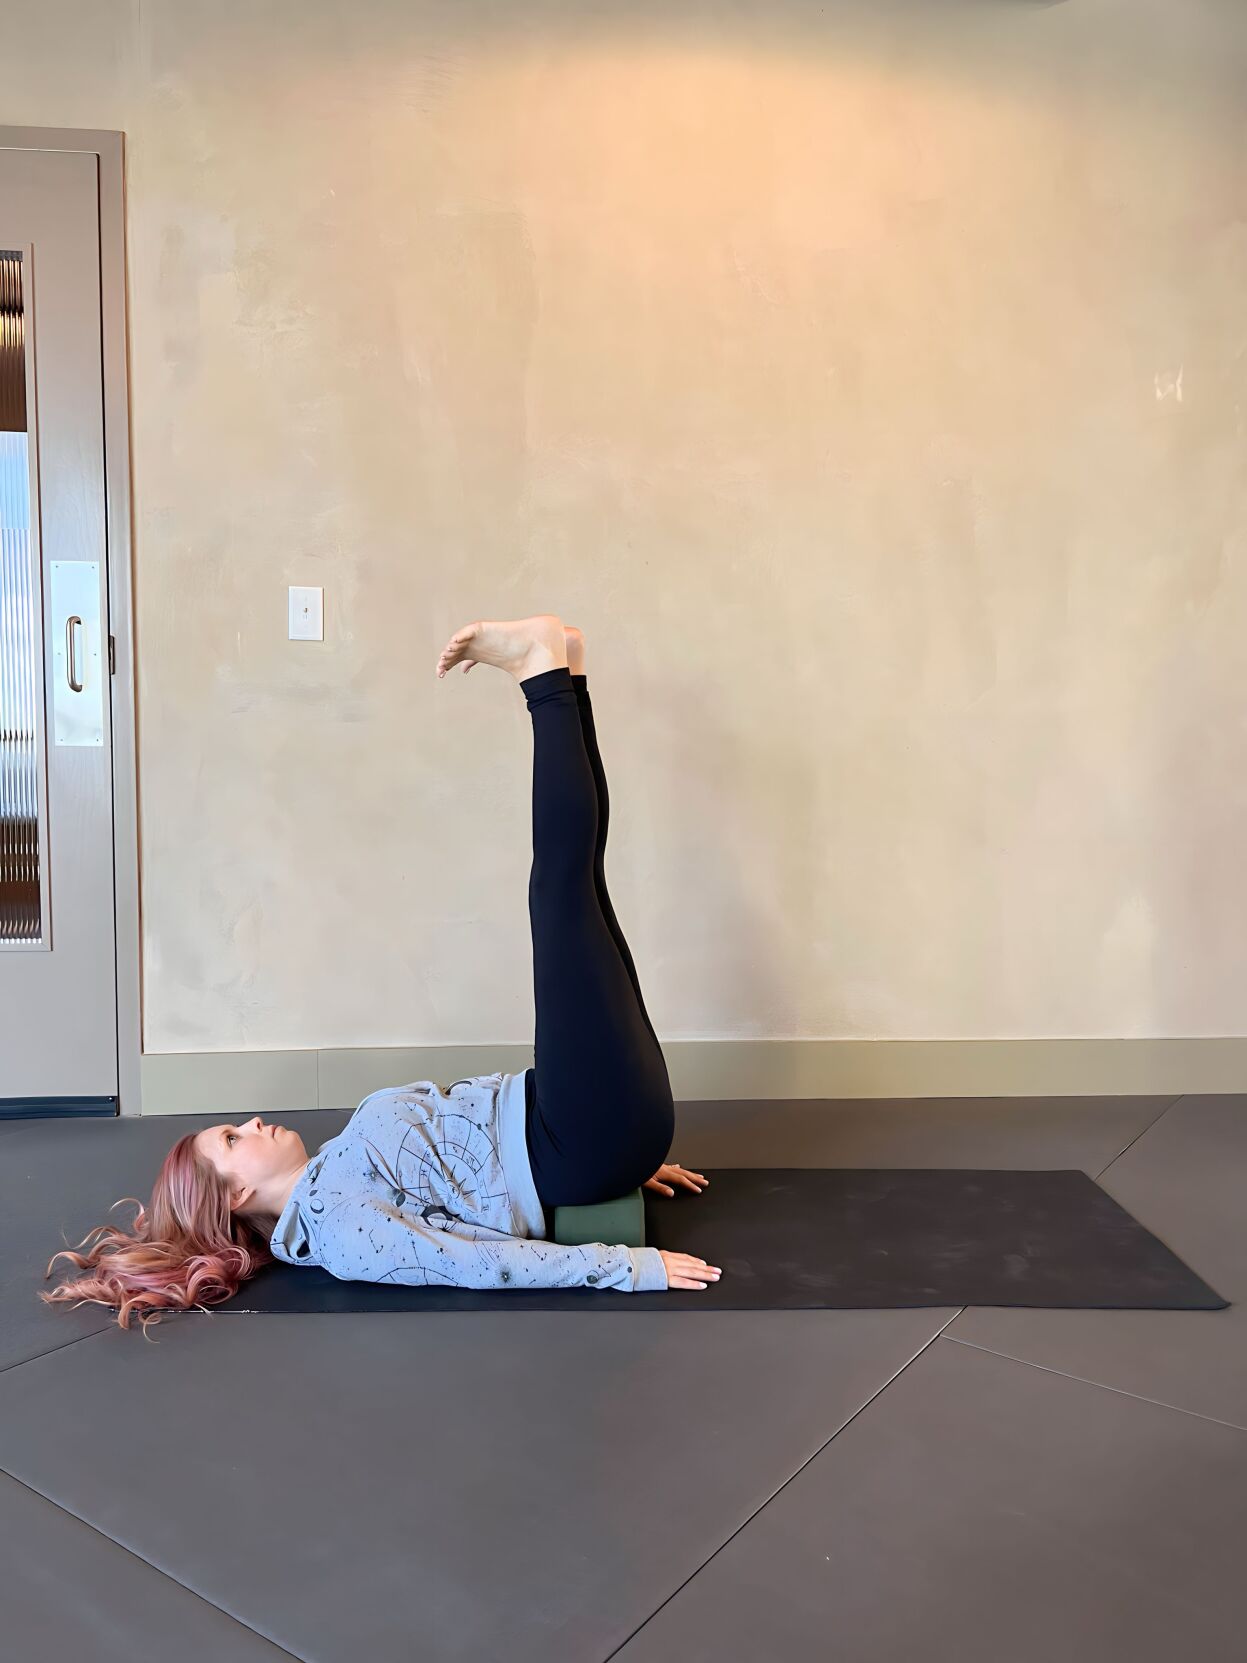 8 Yoga Poses to Relieve Flu and Cold Symptoms